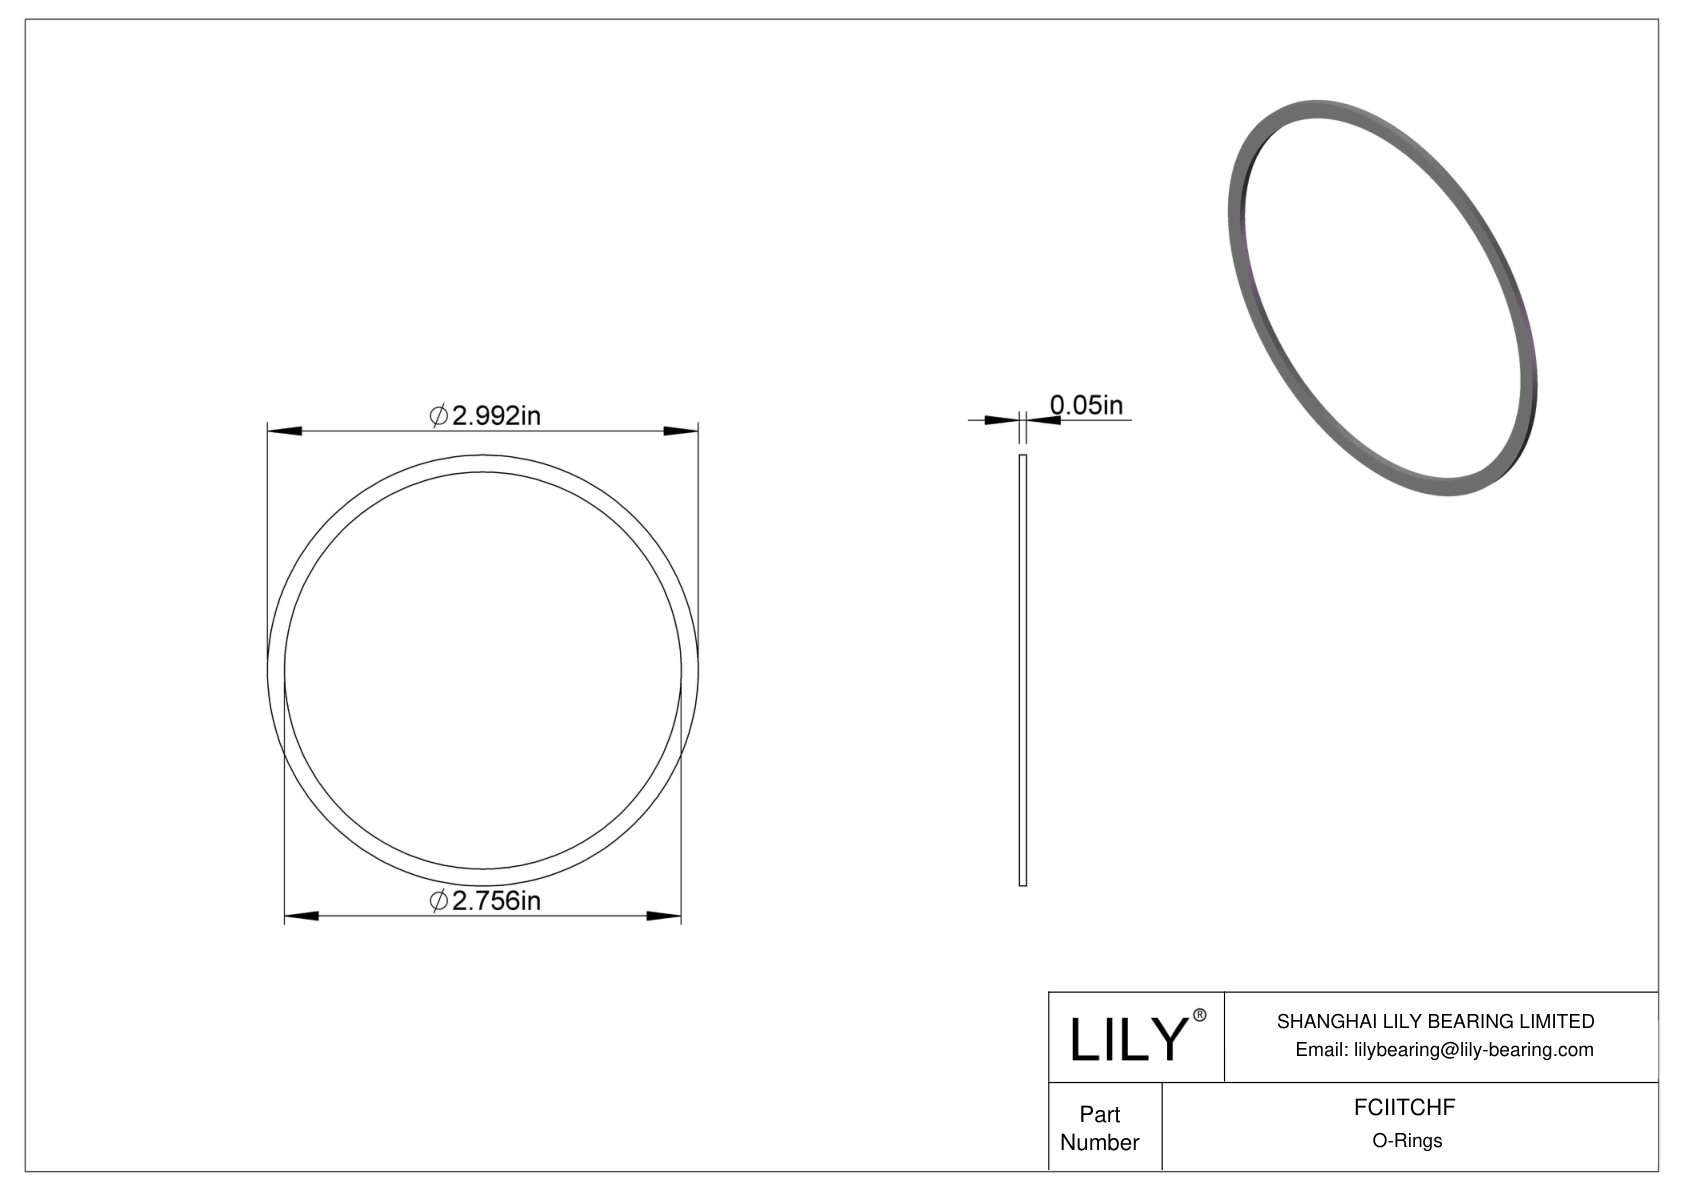 FCIITCHF O-Ring Backup Rings cad drawing